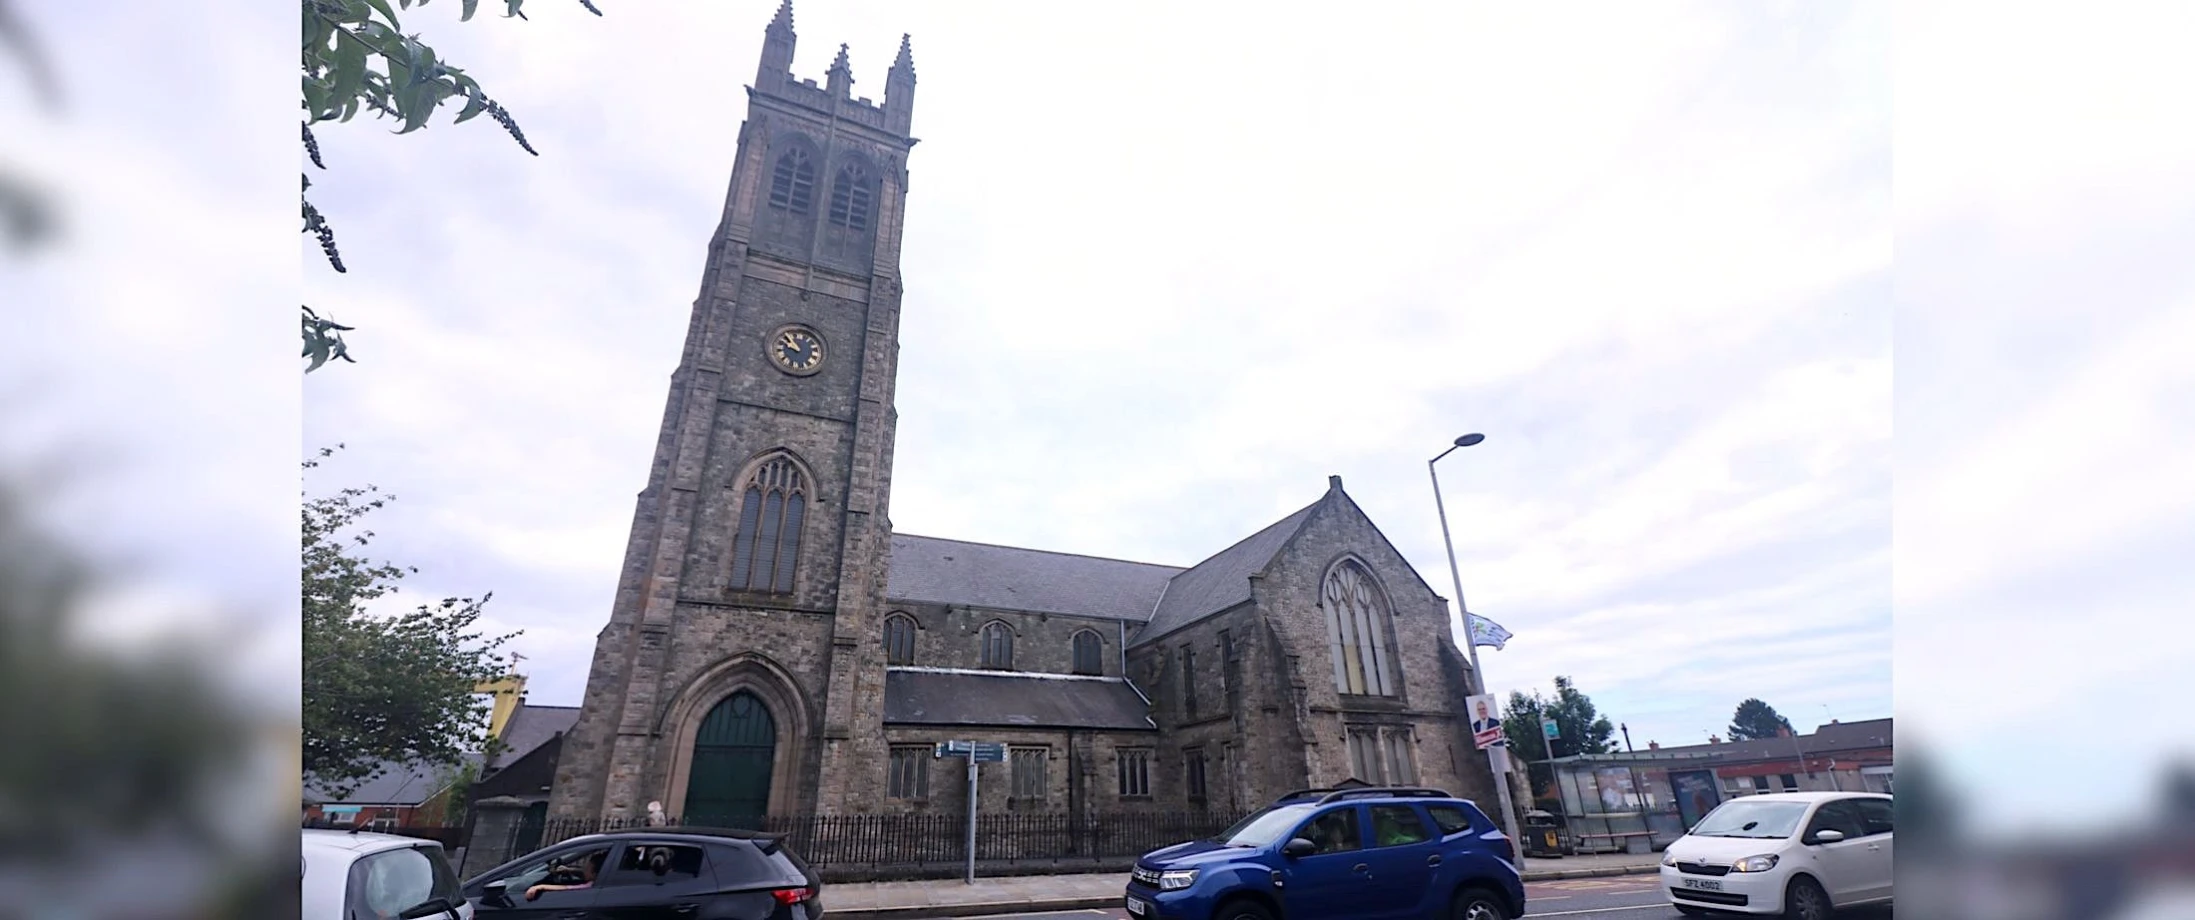 New vision for ministry and outreach in St Patrick’s, Ballymacarrett